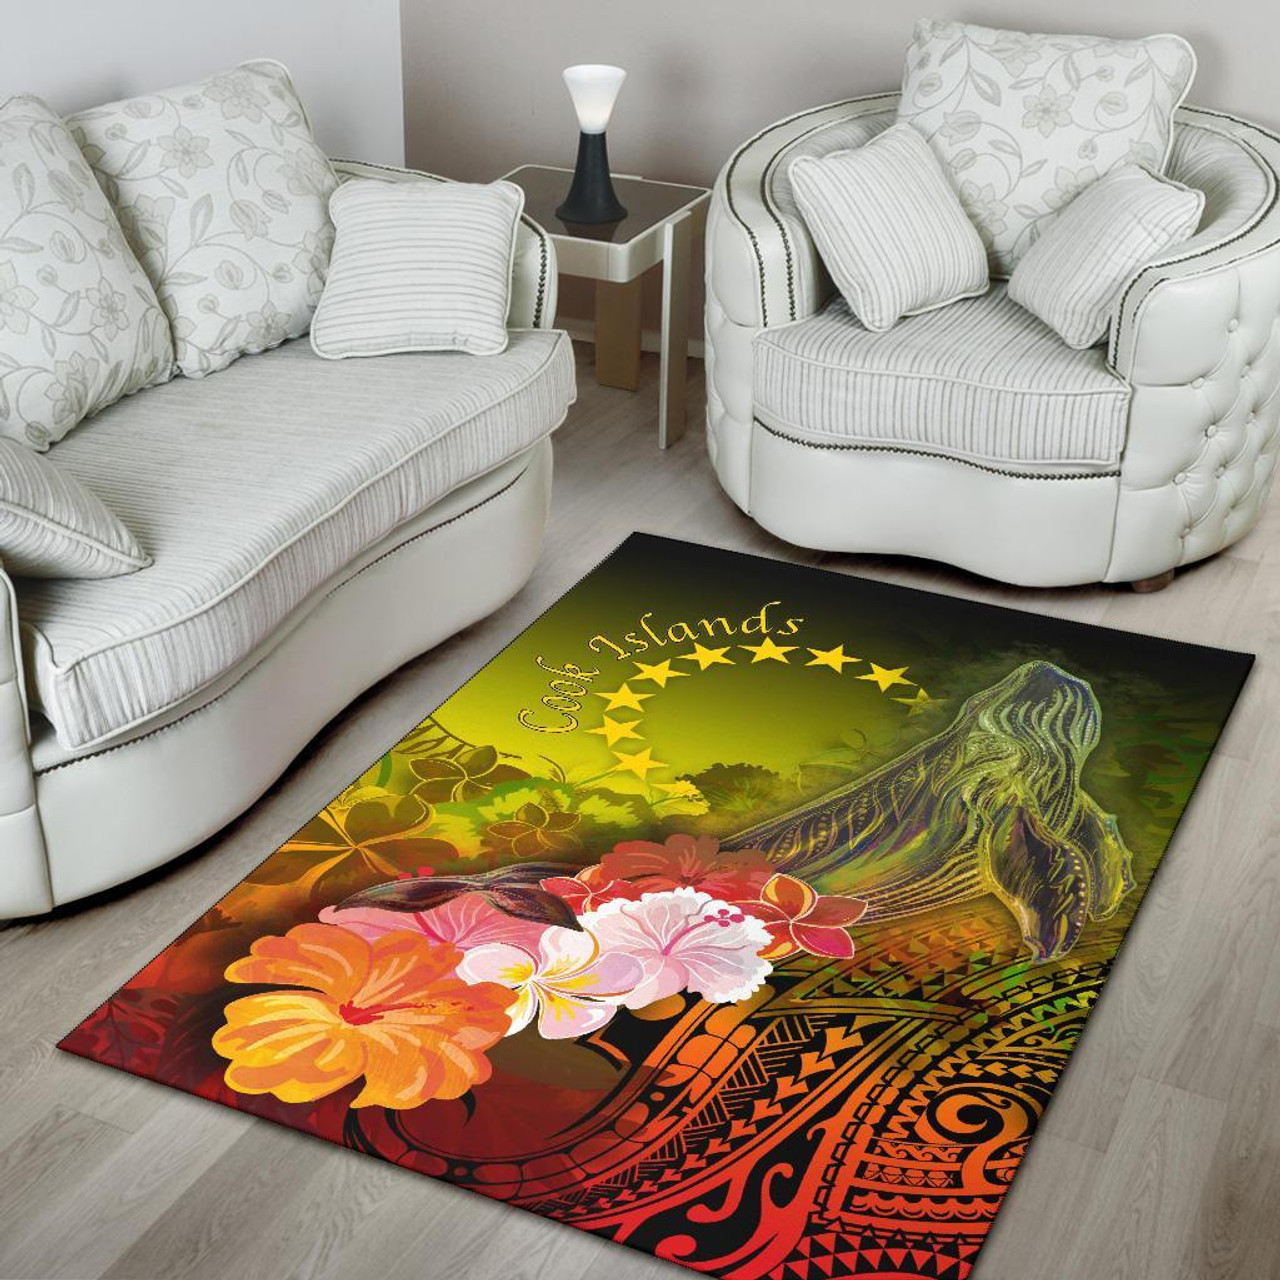 Cook Islands Area Rug - Humpback Whale with Tropical Flowers (Yellow) Polynesian 4